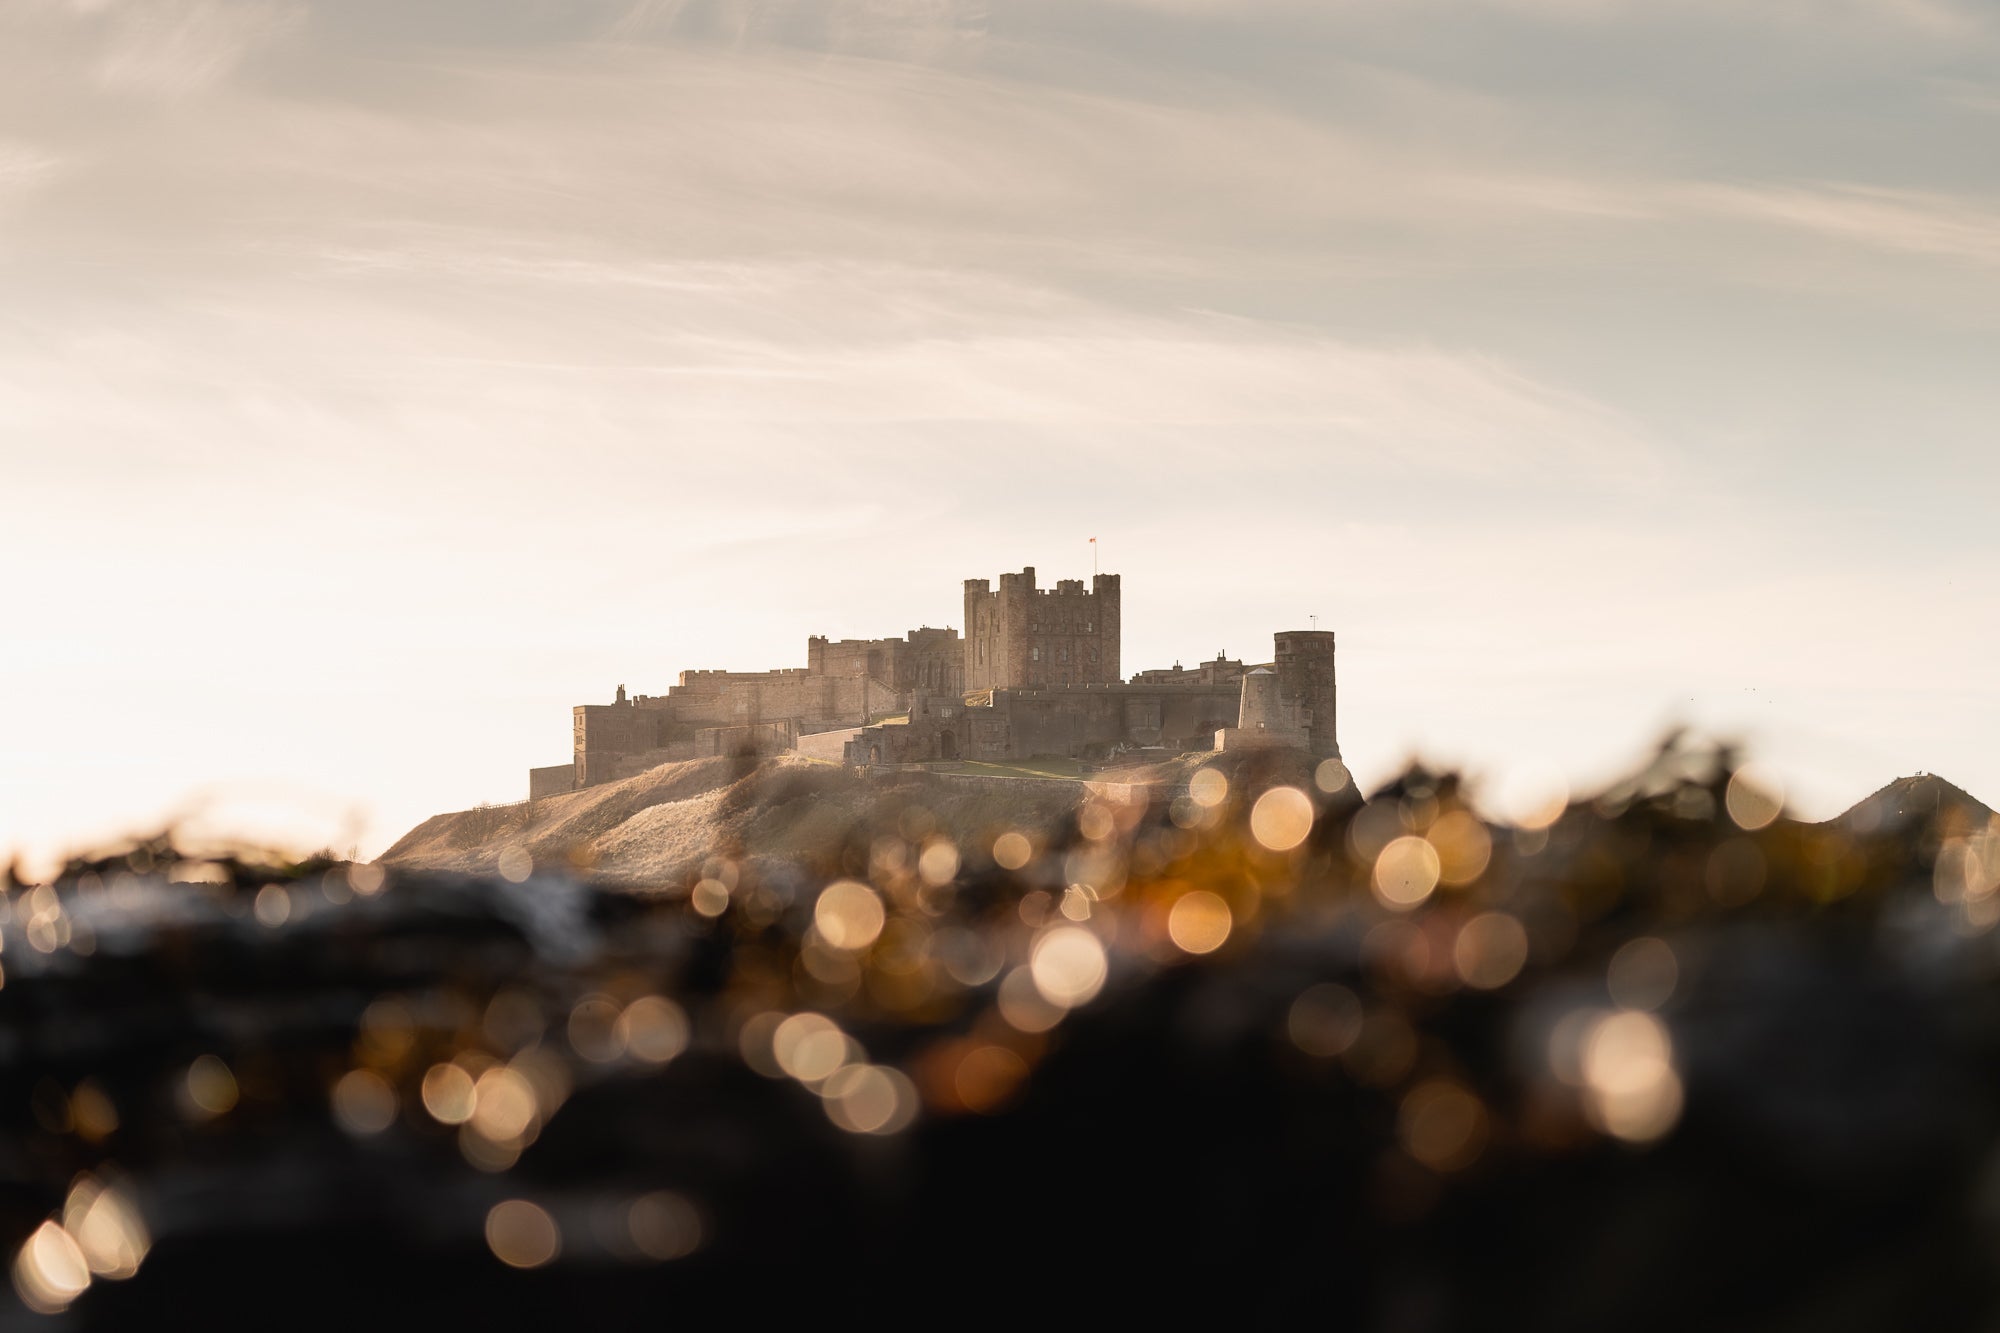 “Bamburgh Bokeh, using the telephoto compress the scene and create some foreground bokeh.” Photo by Daryl Scott Walker. Sony Alpha 7 III. Sony 100-400mm f/4.5-5.6 G Master. 1/800-sec, f/4.5, ISO 160